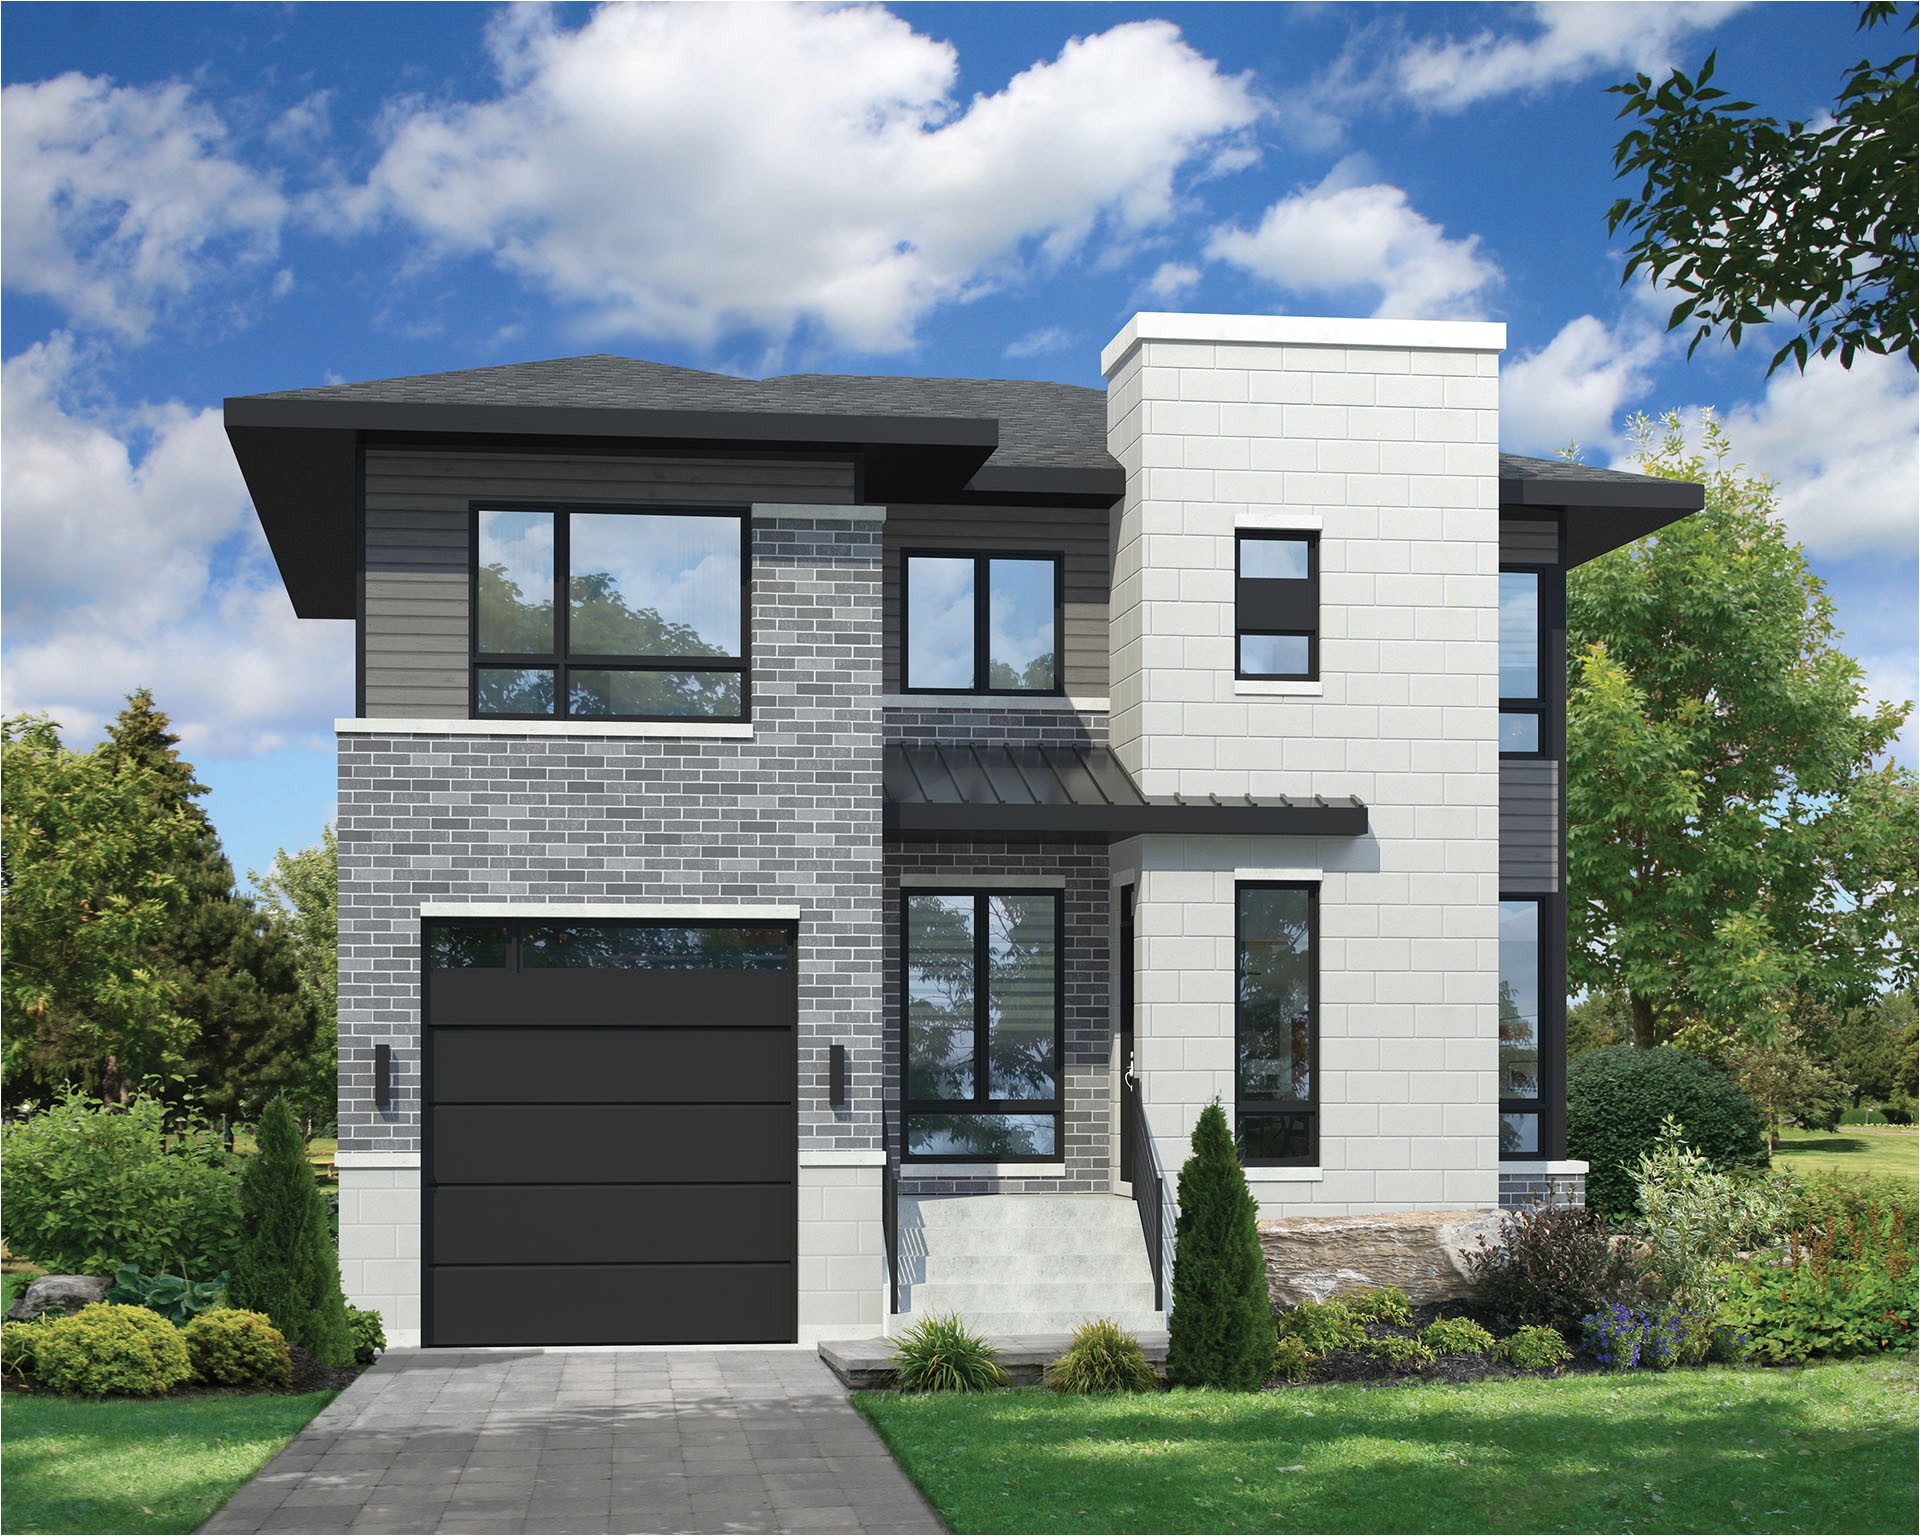 two story contemporary house plan 80806pm